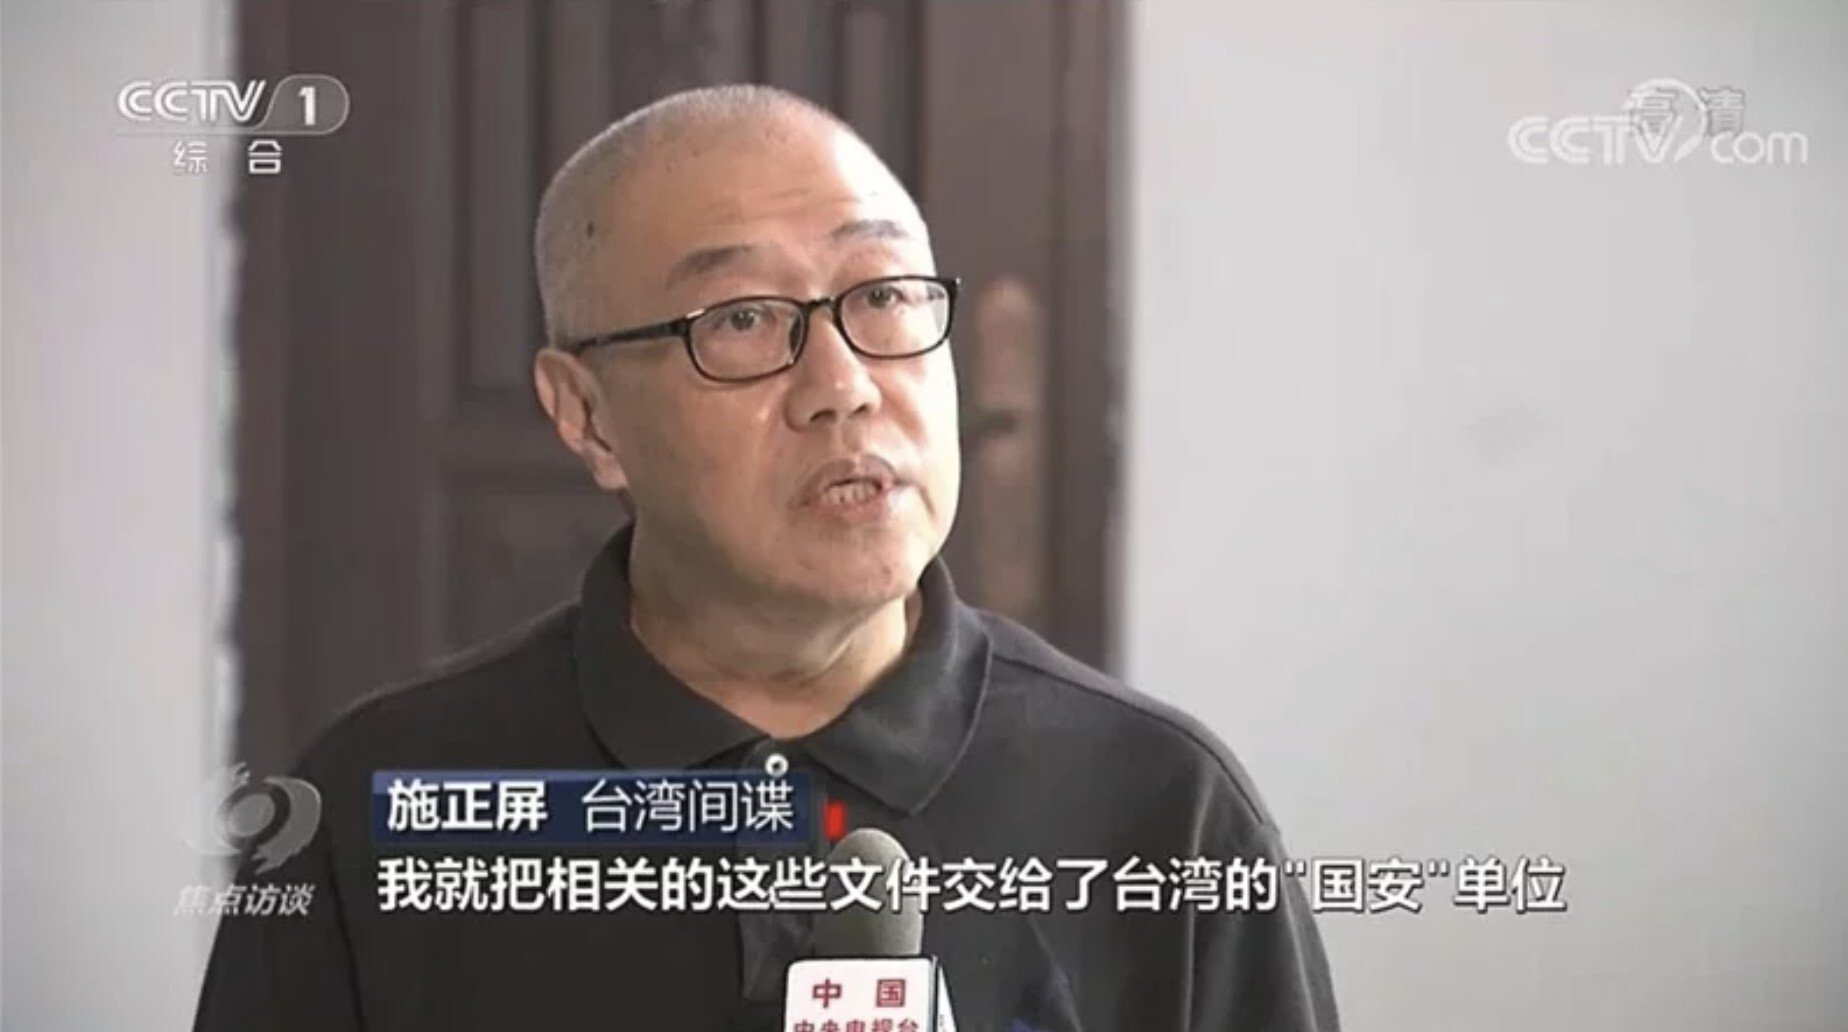 Shih Cheng-ping, a retired National Taiwan Normal University professor, during his “confession” broadcast on Chinese state television. Photo: CCTV